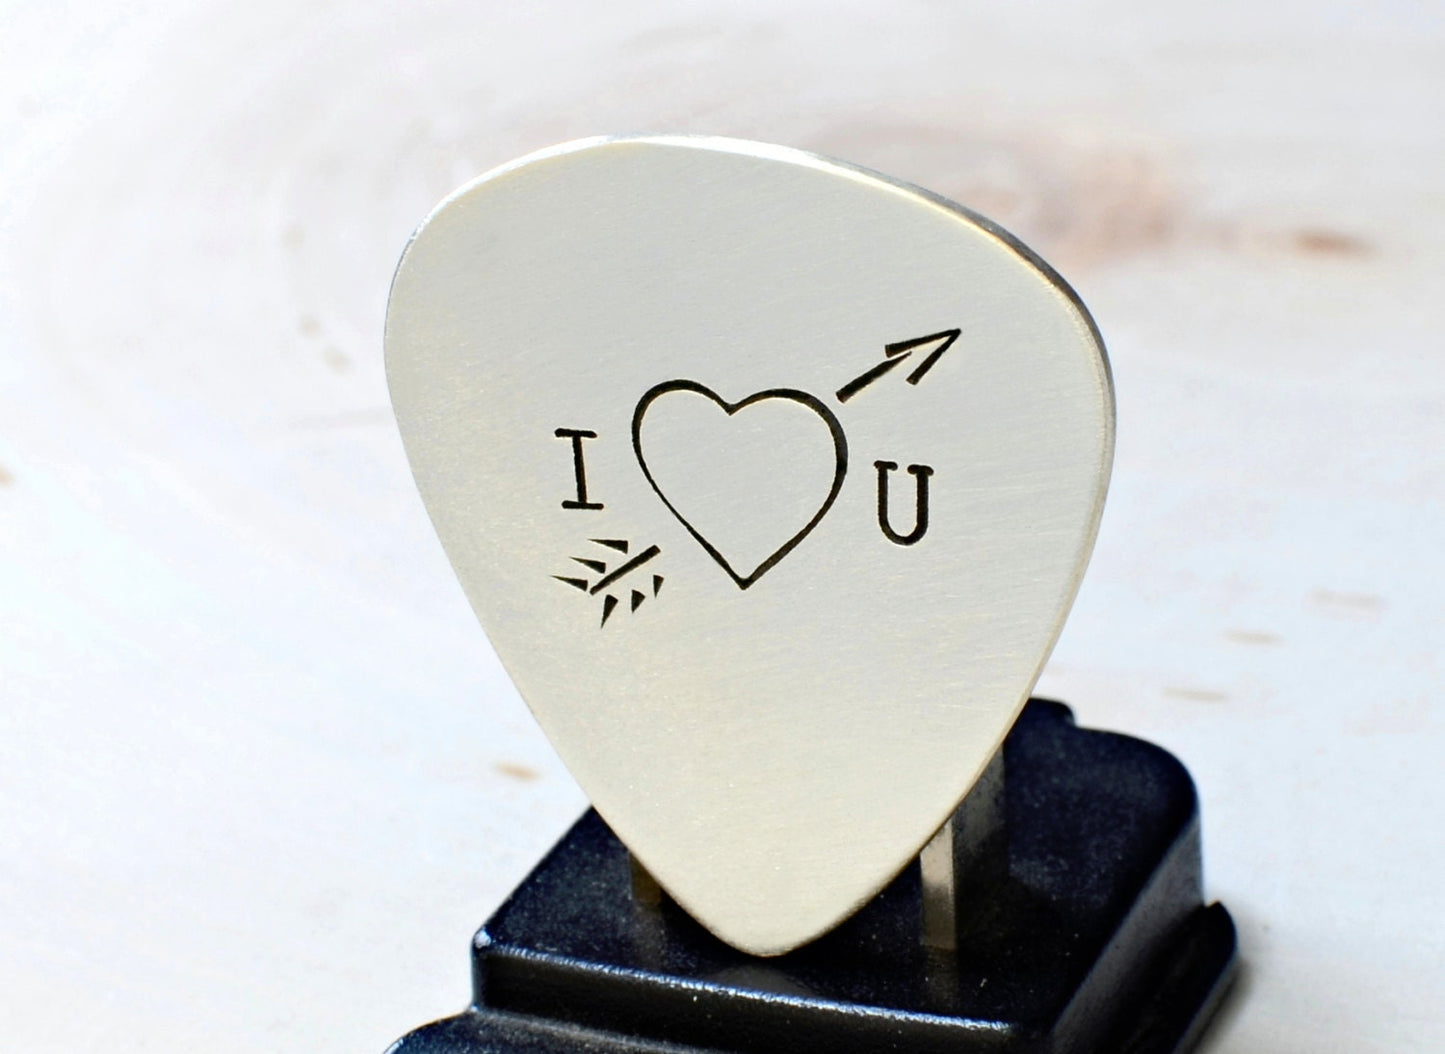 Heart and arrow theme on sterling silver guitar pick